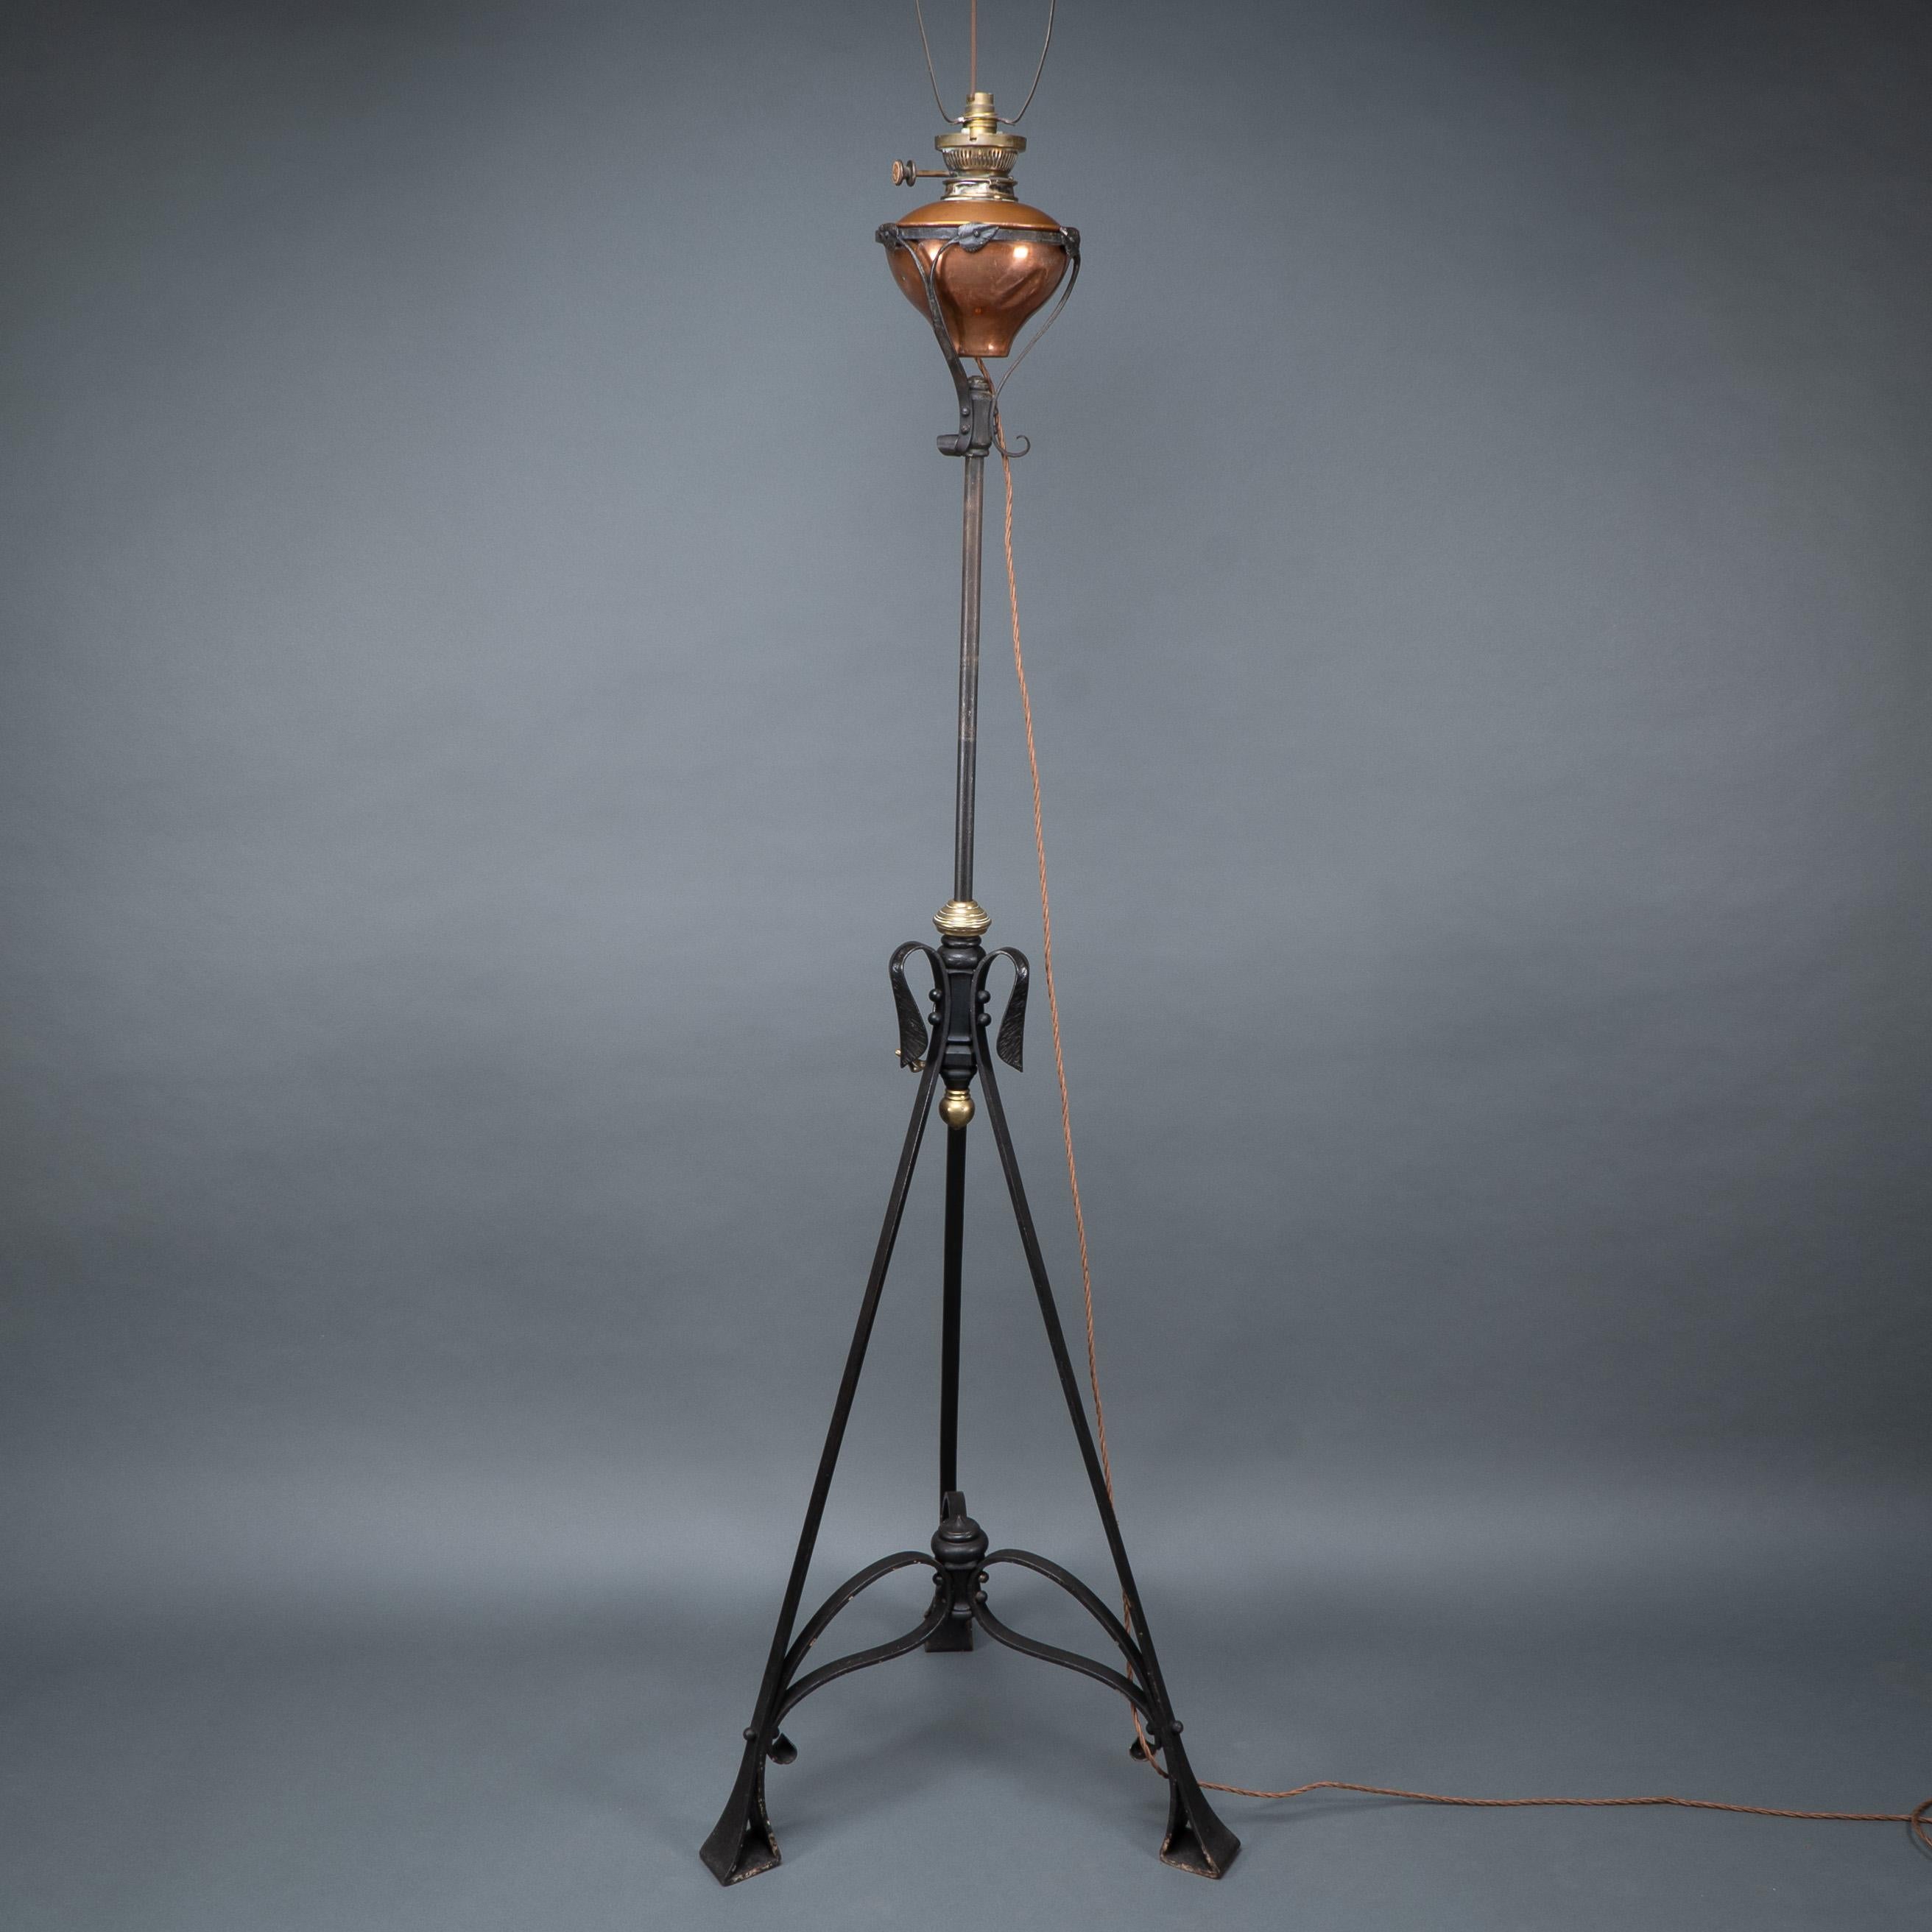 WAS Benson. An extremely rare telescopic iron standard or floor lamp. With later rewiring for electricity.Extended Height: 182.5 cm
